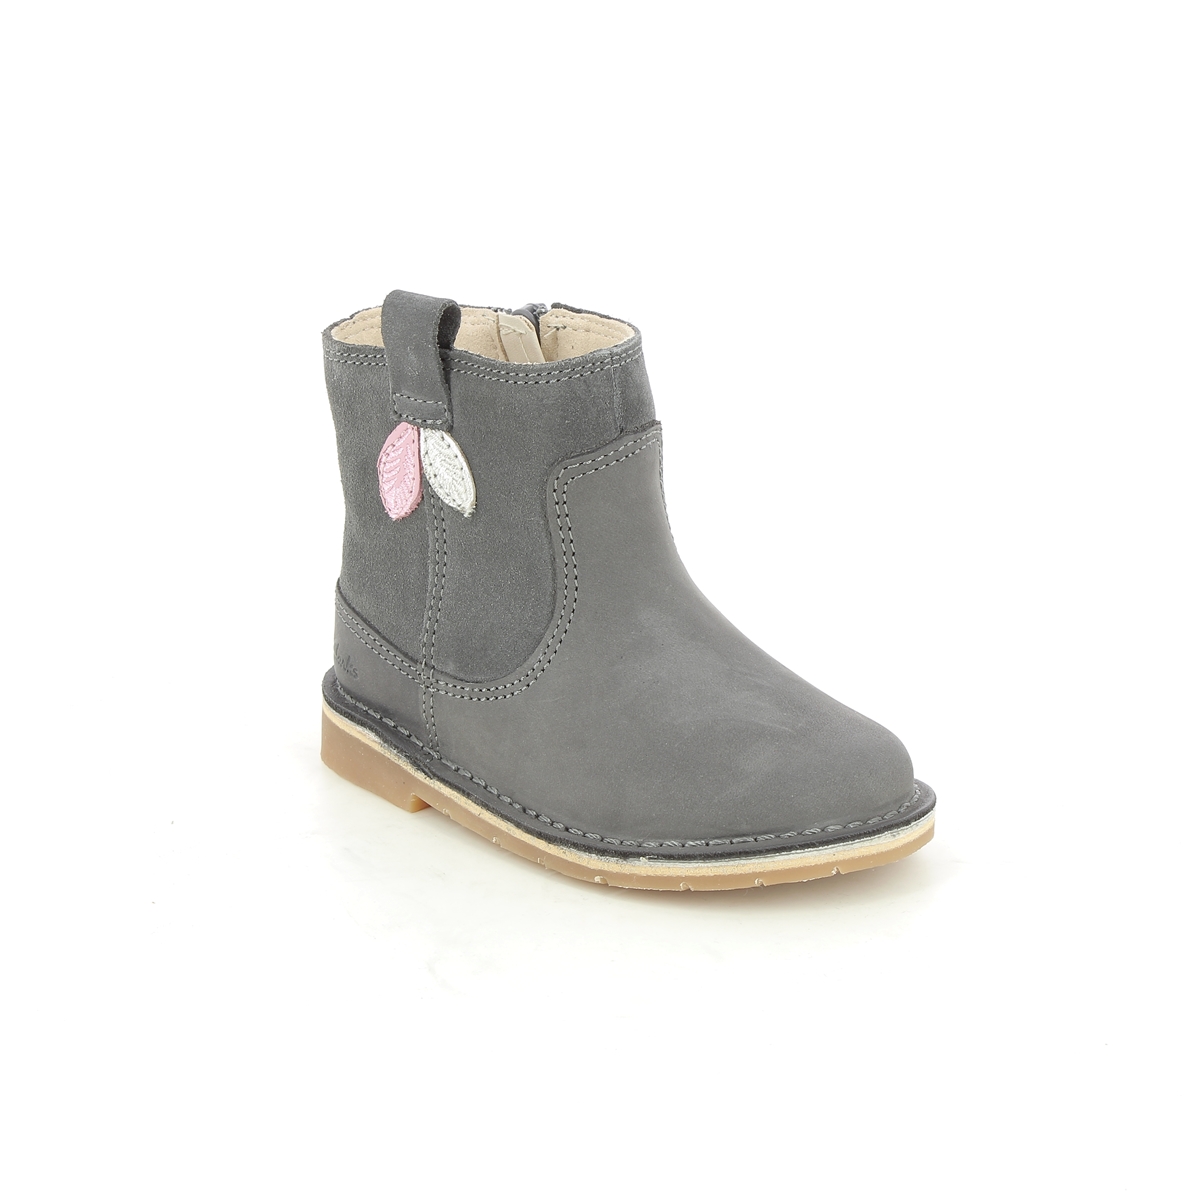 Clarks Comet Style T Grey Leather Kids Toddler Girls Boots 619426F In Size 4.5 In Plain Grey Leather F Width Fitting Regular Fit For kids